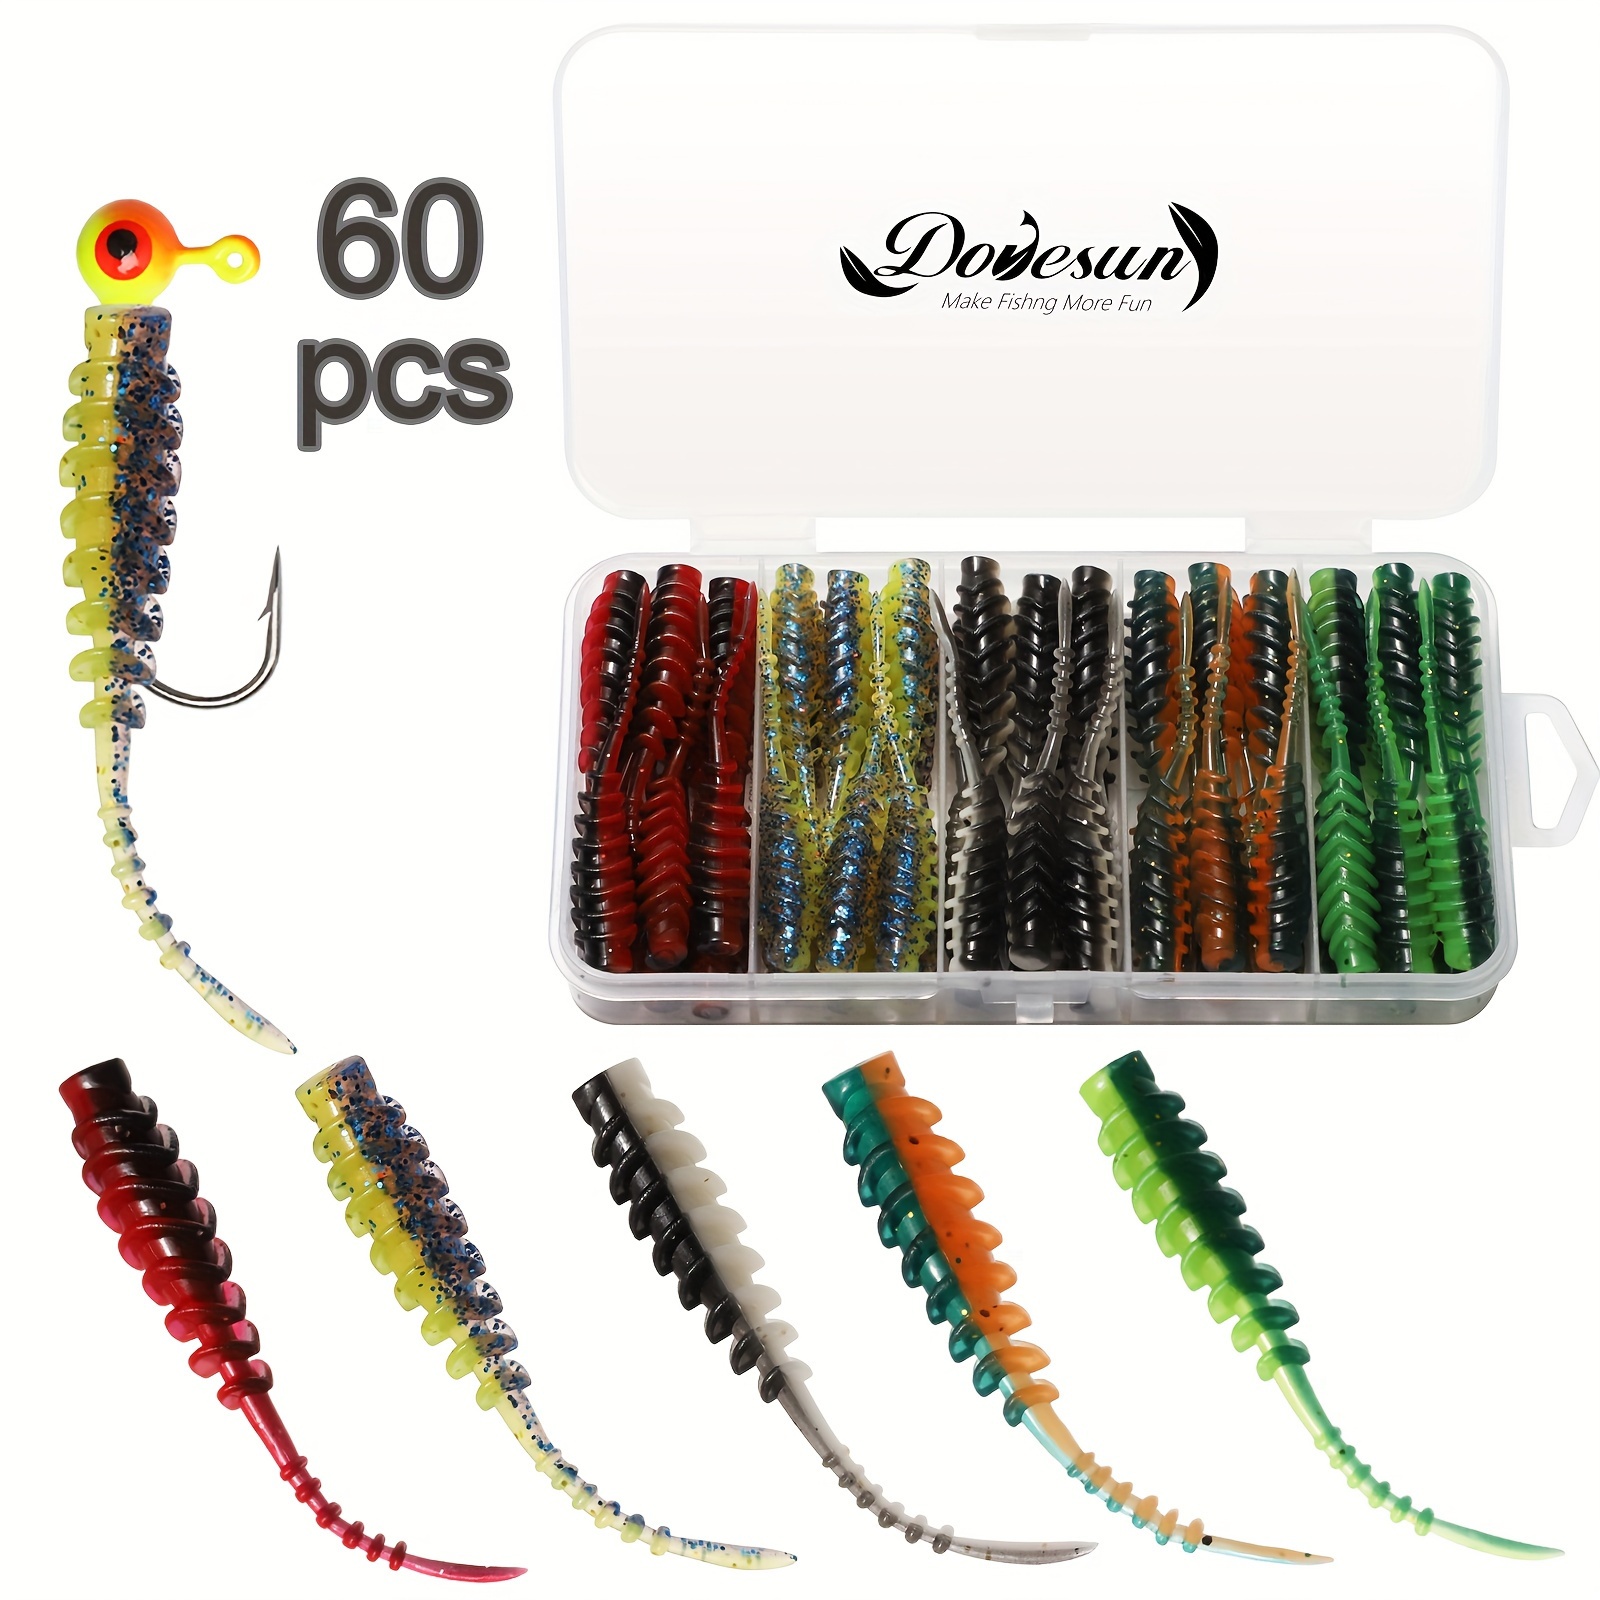 * 60pcs Soft Fishing Lures Set, Crappie Walleye Trout Bass Fishing Baits,  Bionic Worm With Tackle Box